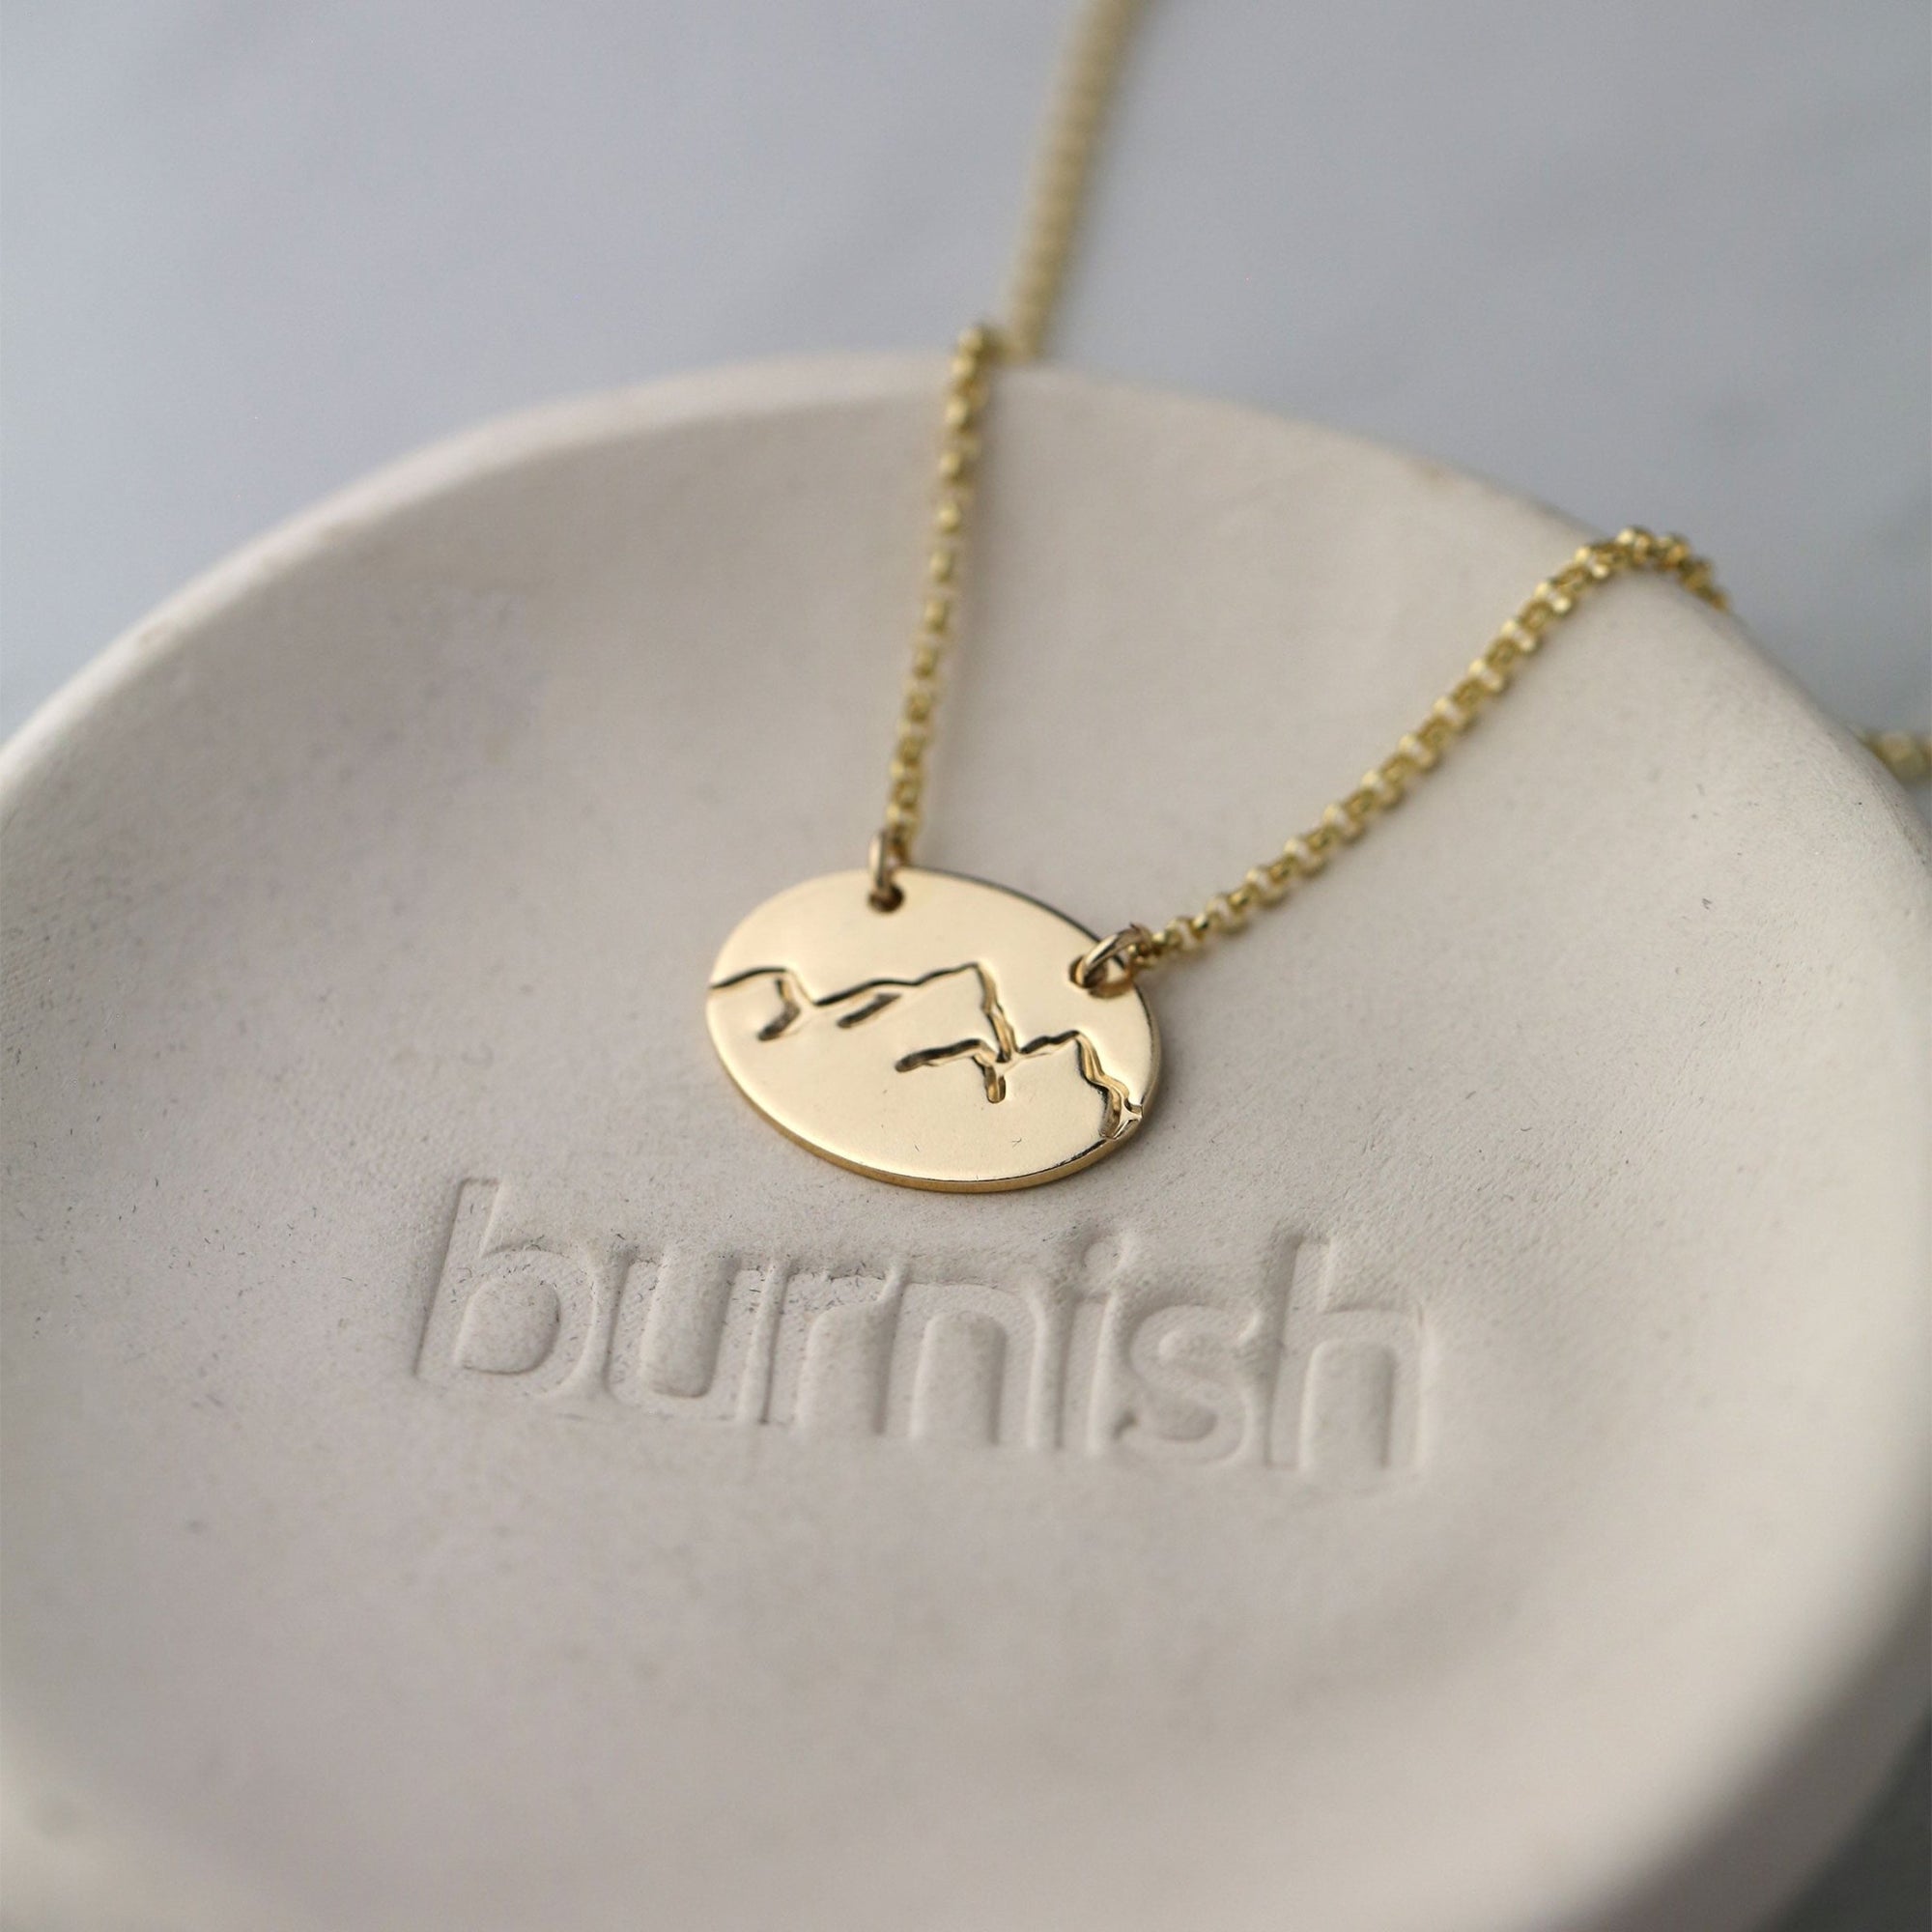 Gold Hand Stamped Mountain Necklace handmade by Burnish